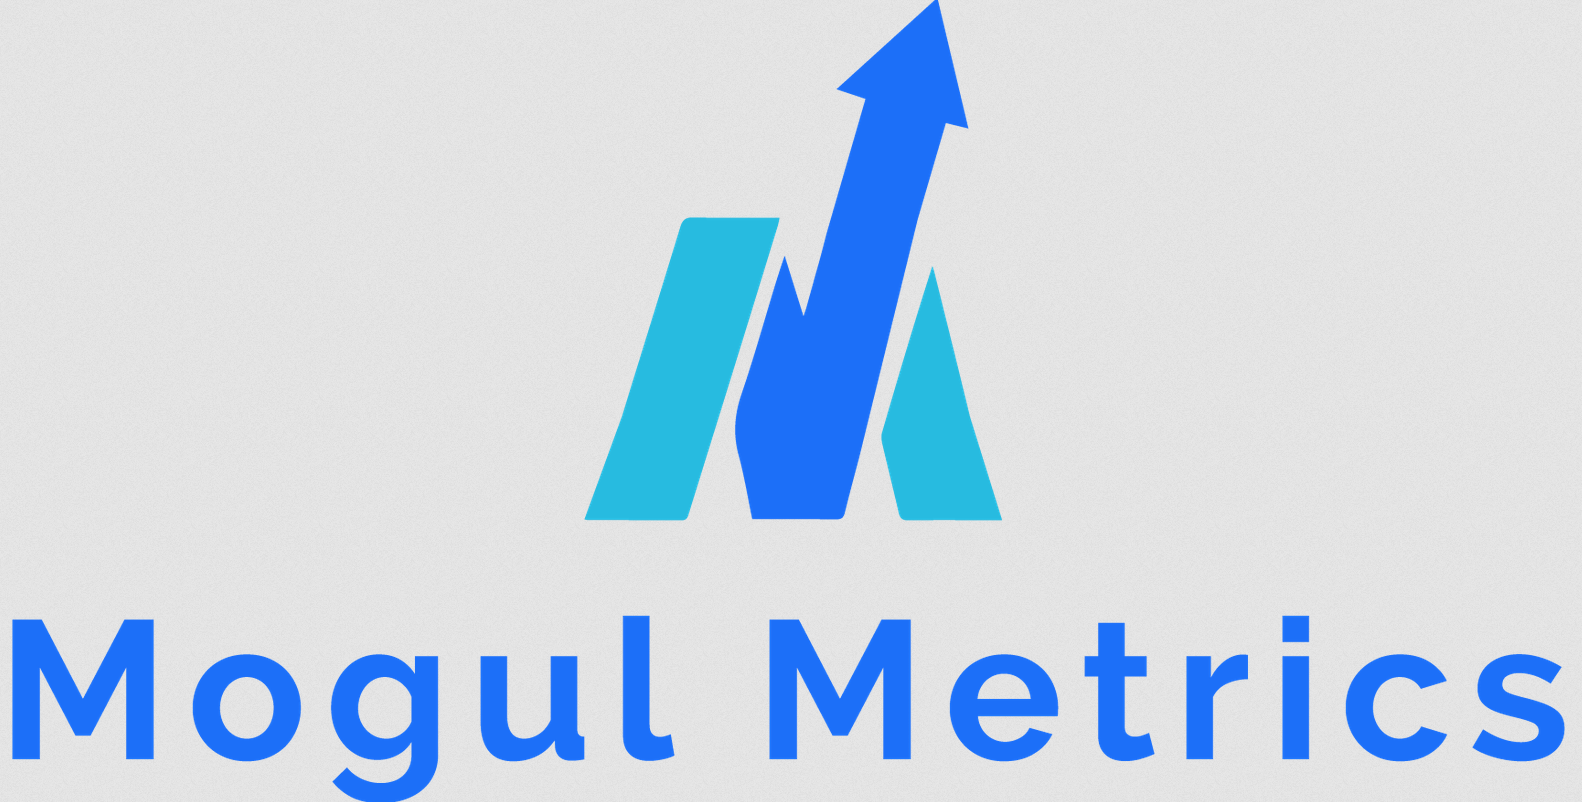 Metric Mogul - Learn Google Tag Manager by Example